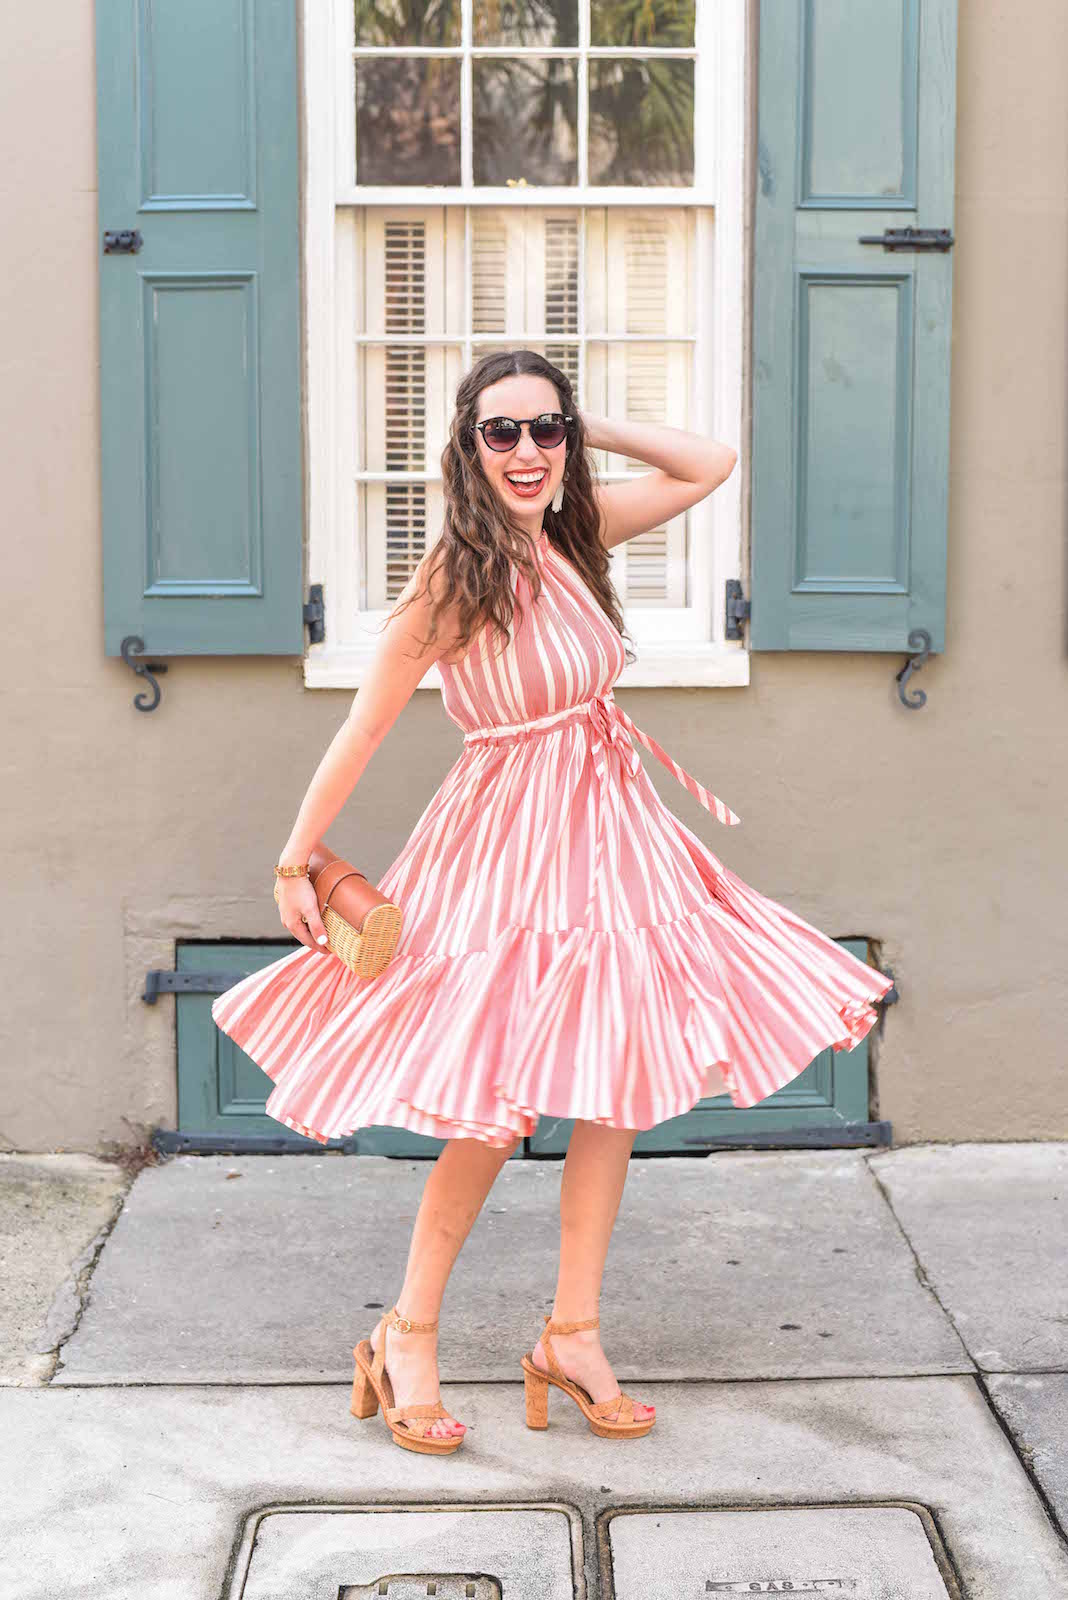 Party dress inspiration in an Anthropologie red and white striped halter dress